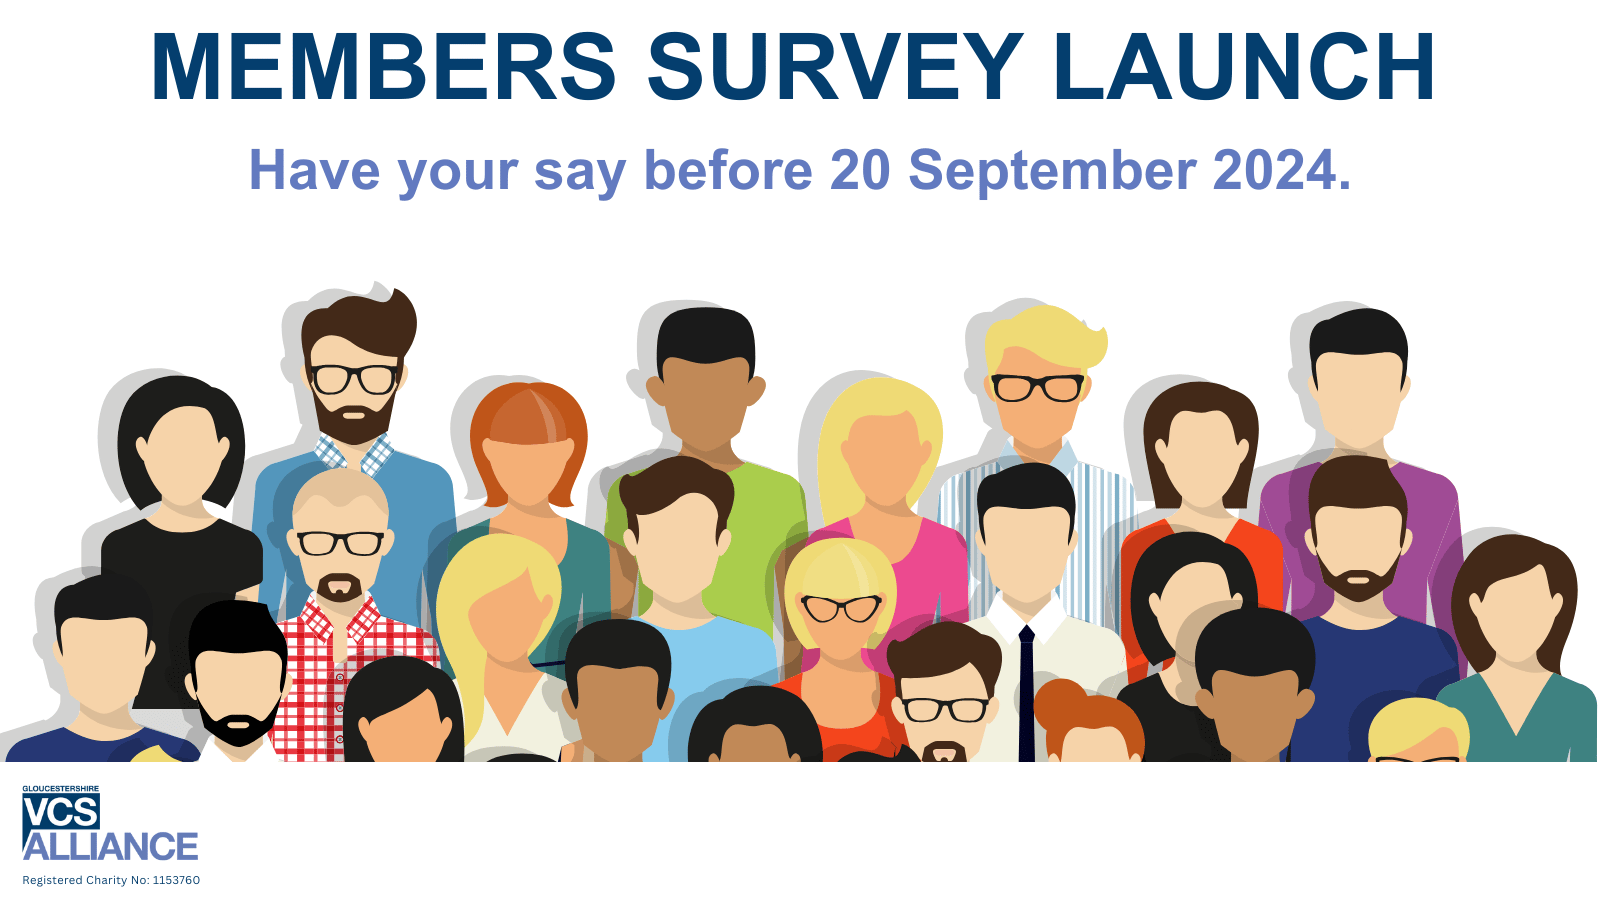 Words: Members survey launch. Have your say before 20 September 2024. Group of cartoon people below words.